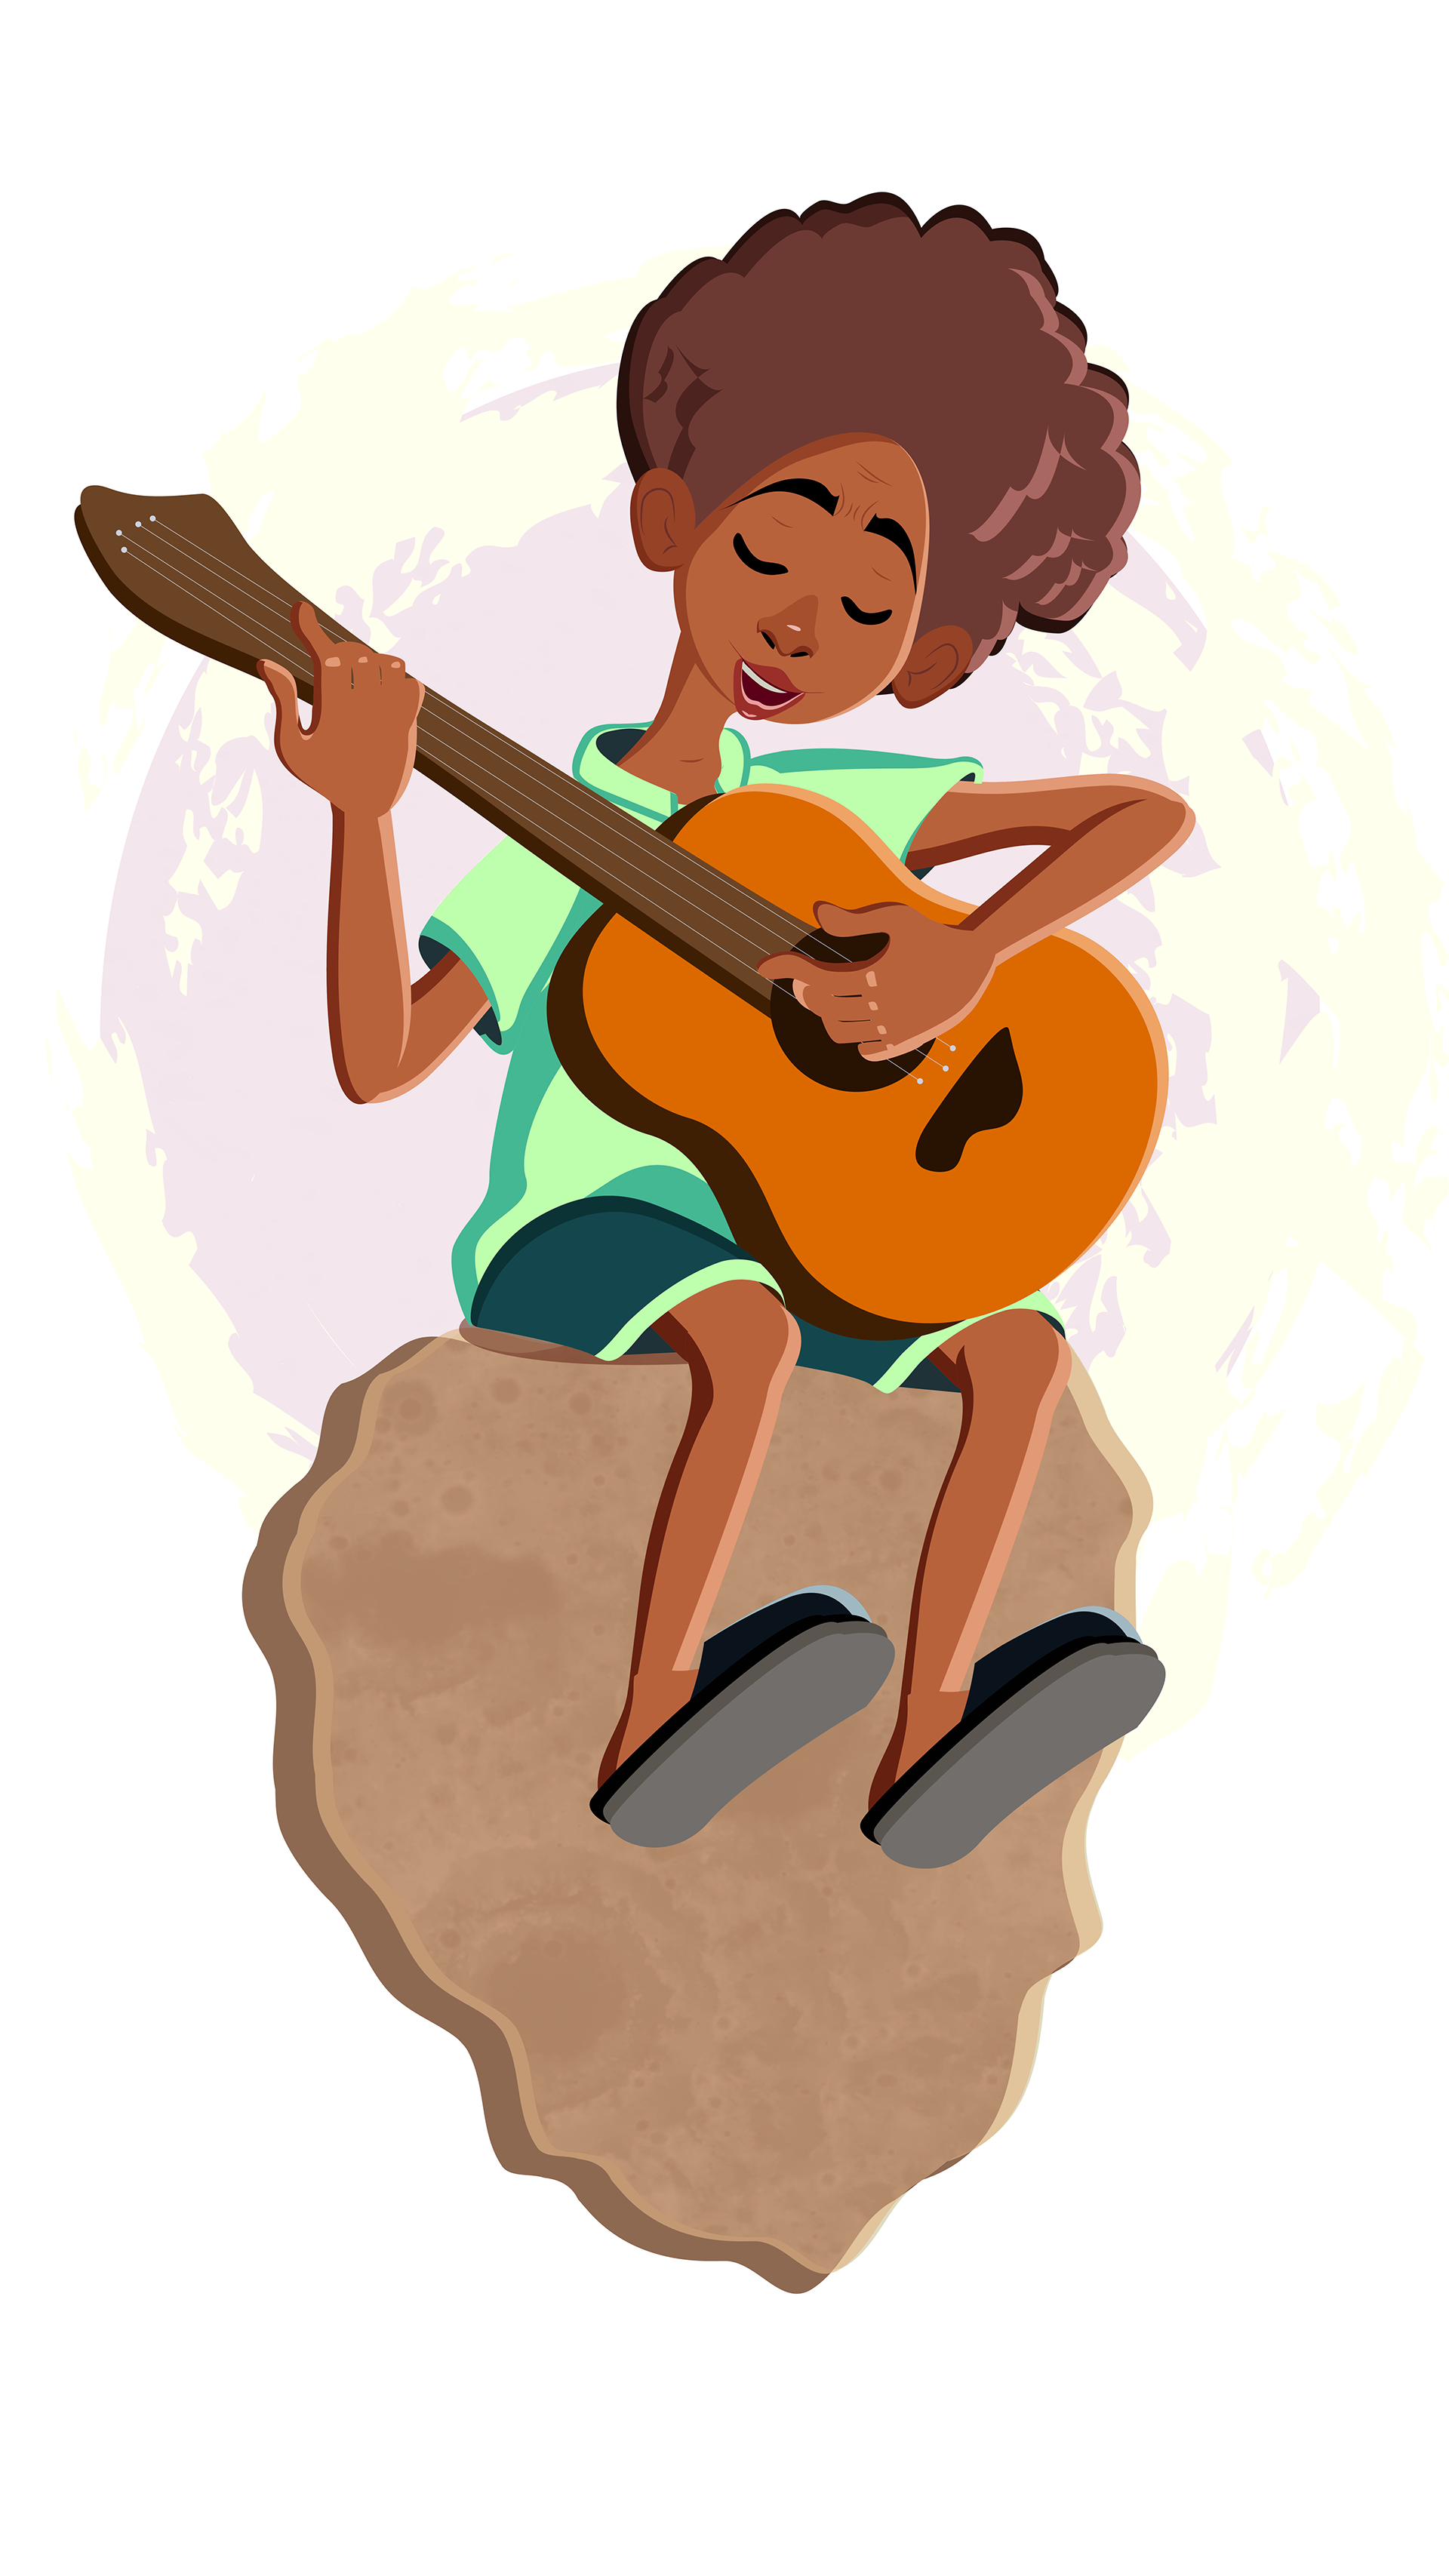 Playing Guitar GIF Simple character animation | Behance